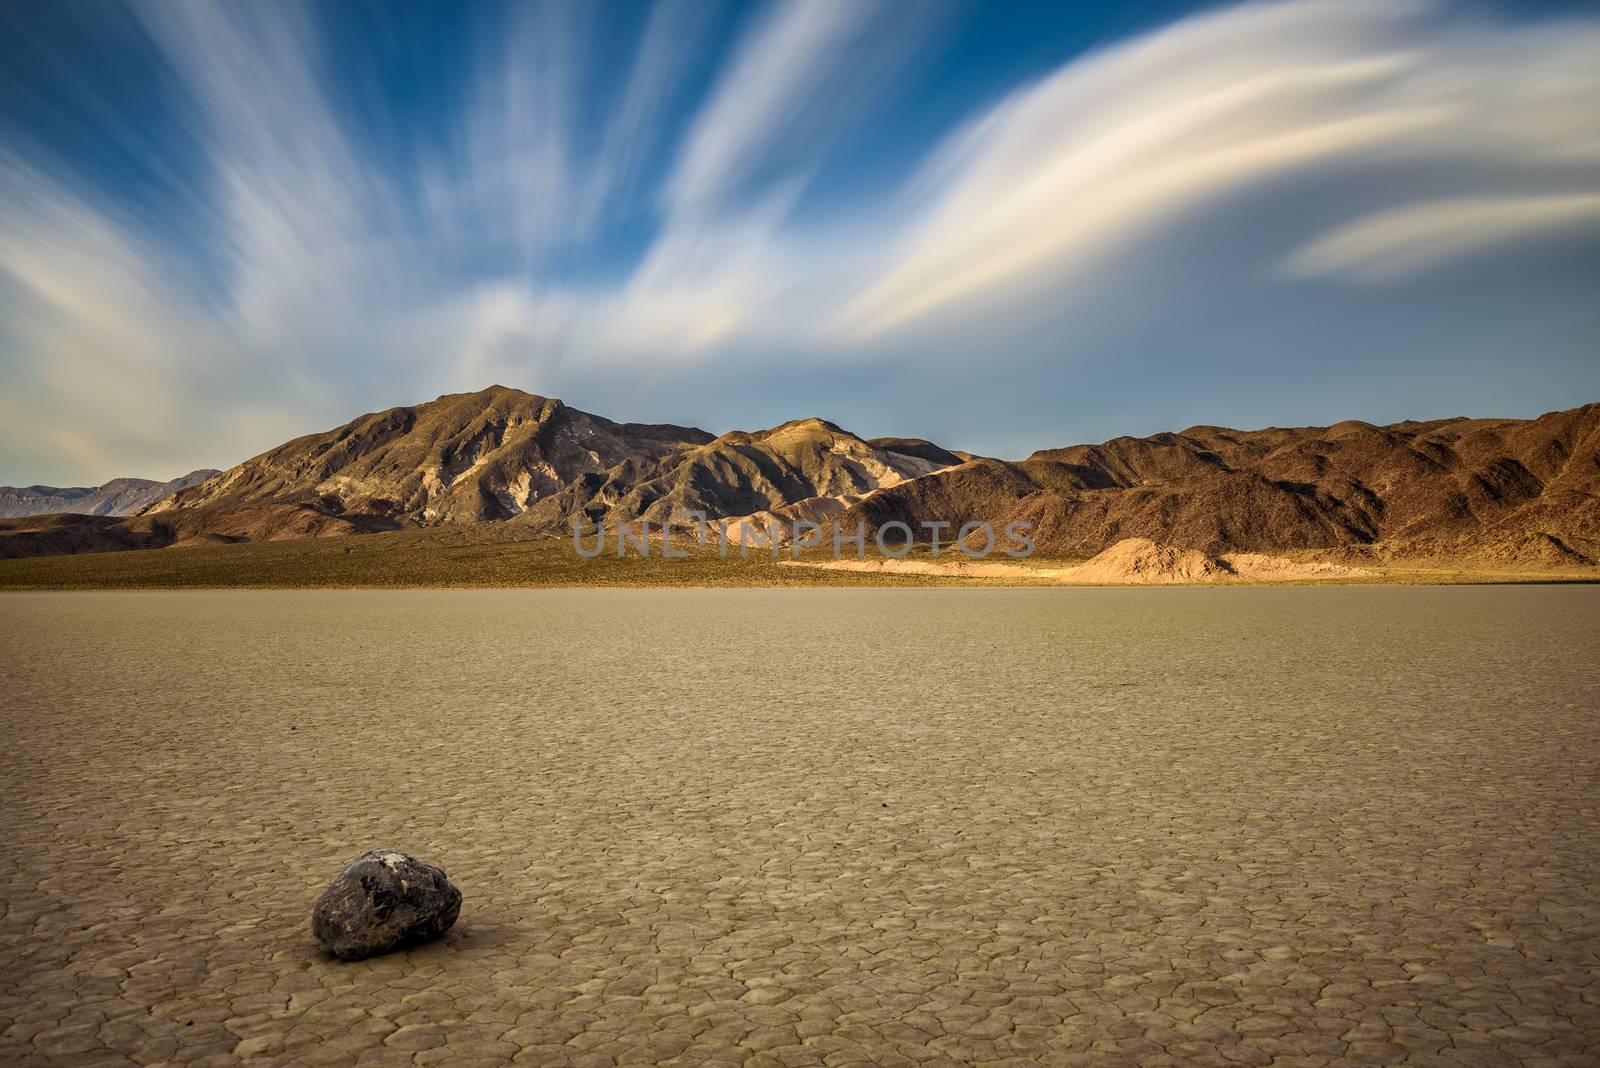 Sailing stone on the The Racetrack Playa in Death Valley National Park during golden hour. The Racetrack Playa is a scenic dry lake with moving stones that inscribe linear imprints. Long exposure.